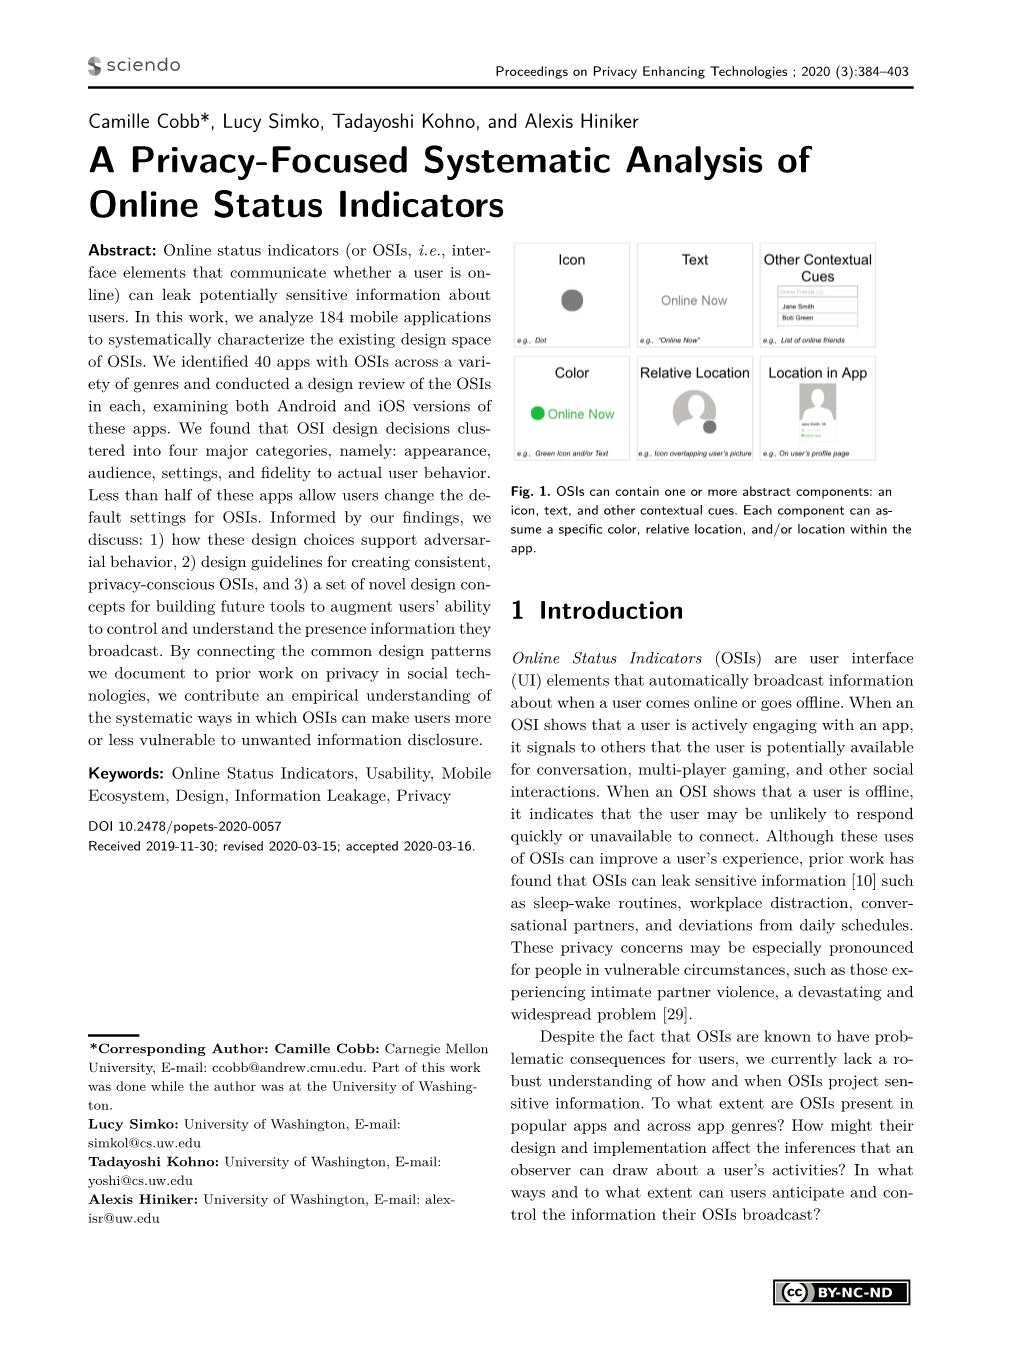 A Privacy-Focused Systematic Analysis of Online Status Indicators